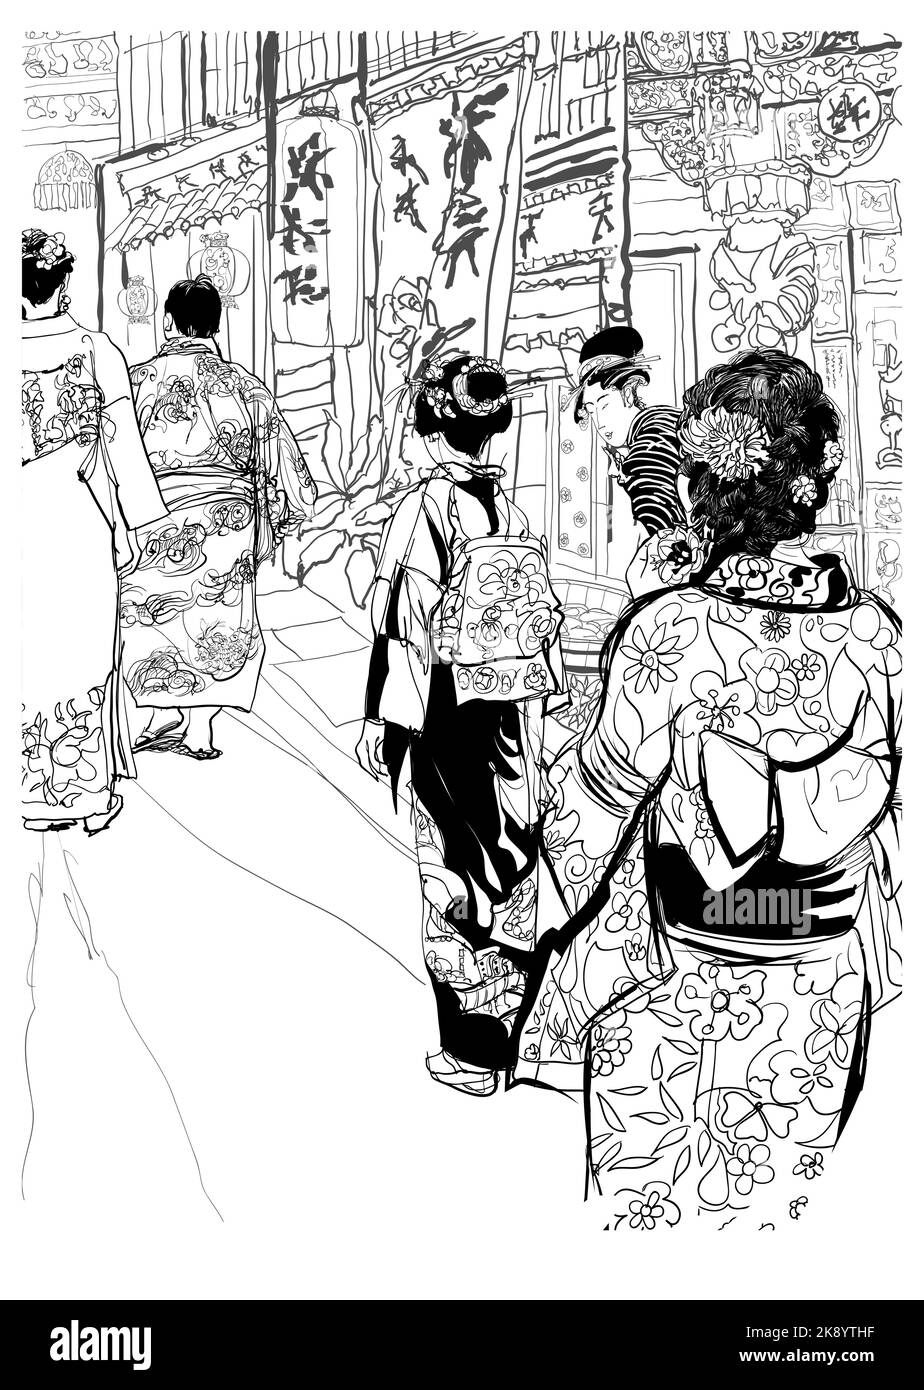 Japan, street in japan with people in traditional clothing - vector illustration  (japanese caracters are fake - no meaning)  (Ideal for printing, pos Stock Vector